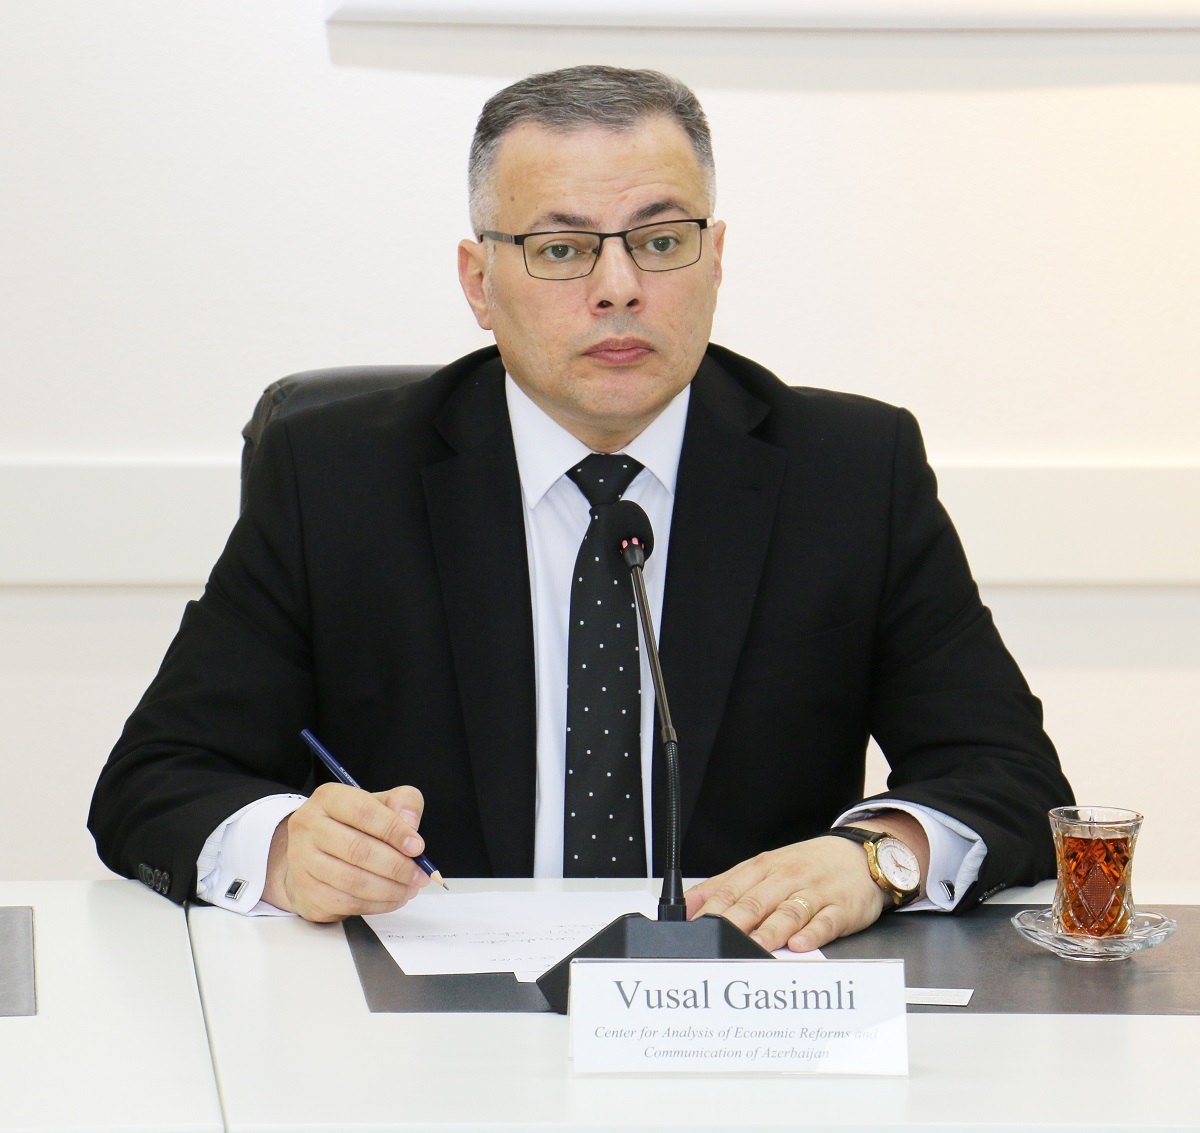 Vusal Gasimli met with the Executive director of the Asian Development Bank